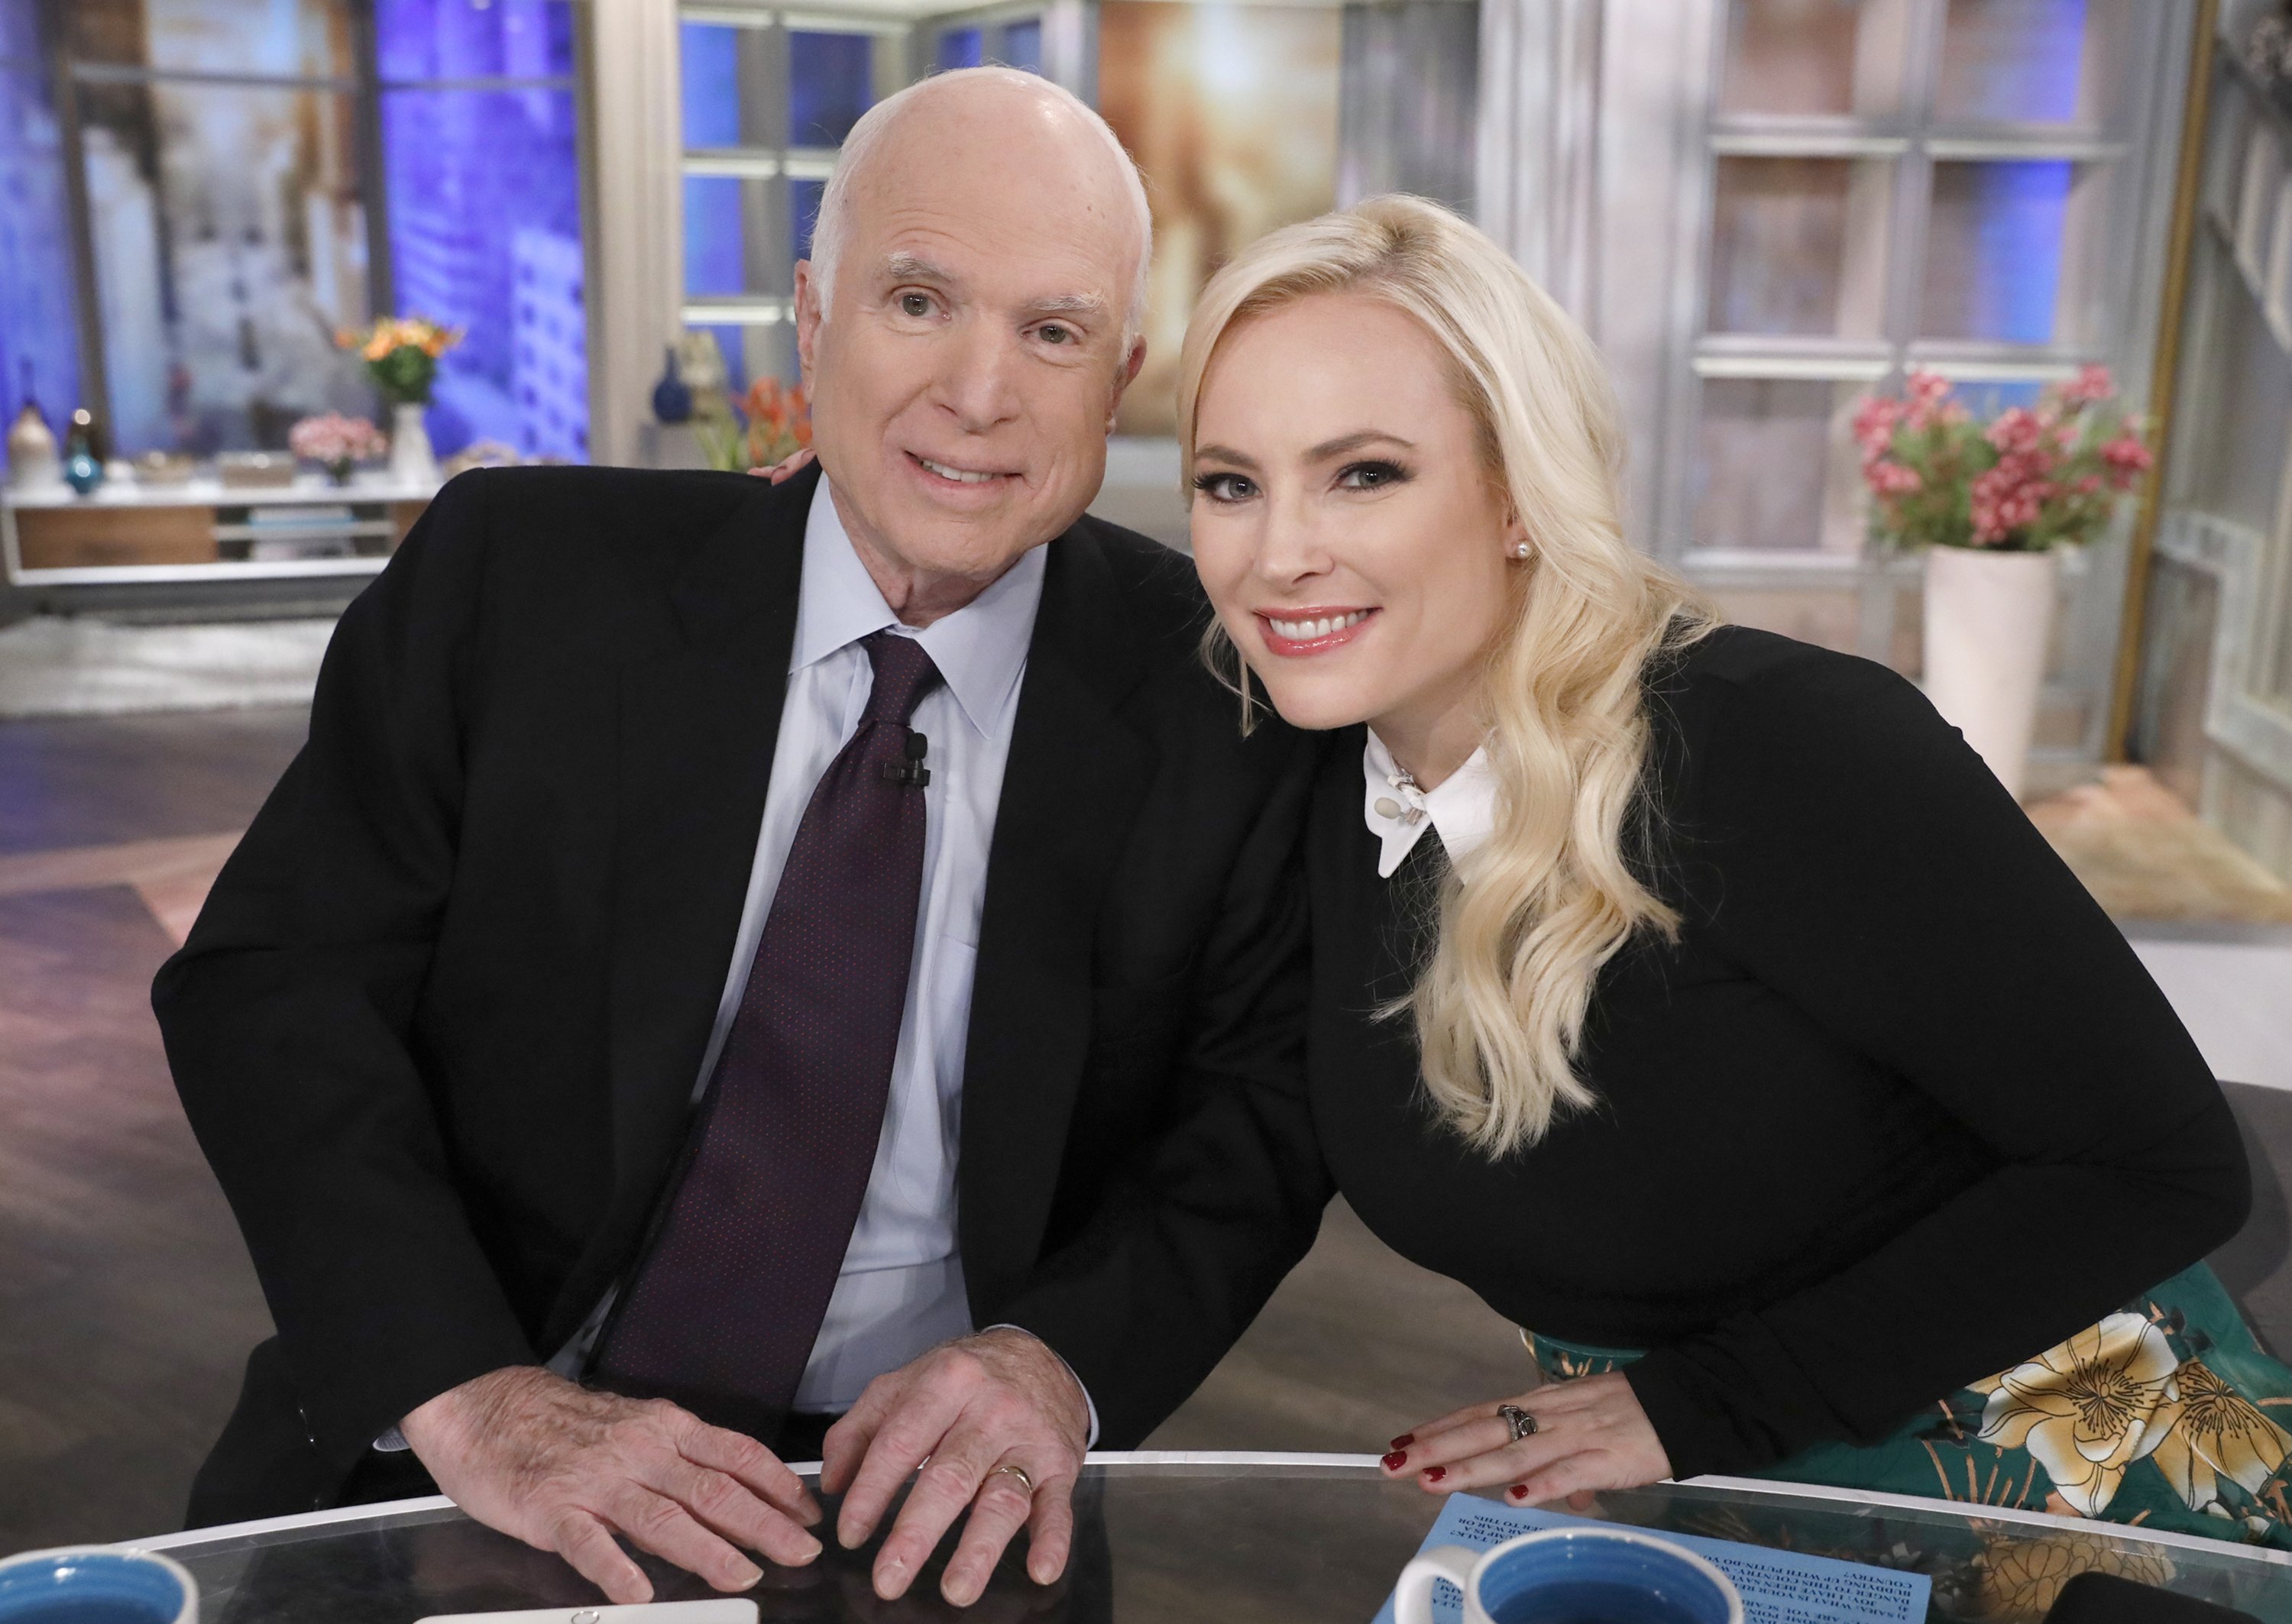 Senator John McCain, Meghan McCain on 'The View', a visit for Meghan McCain's birthday, Monday, October 23, 2017 |  Source: Getty Images  